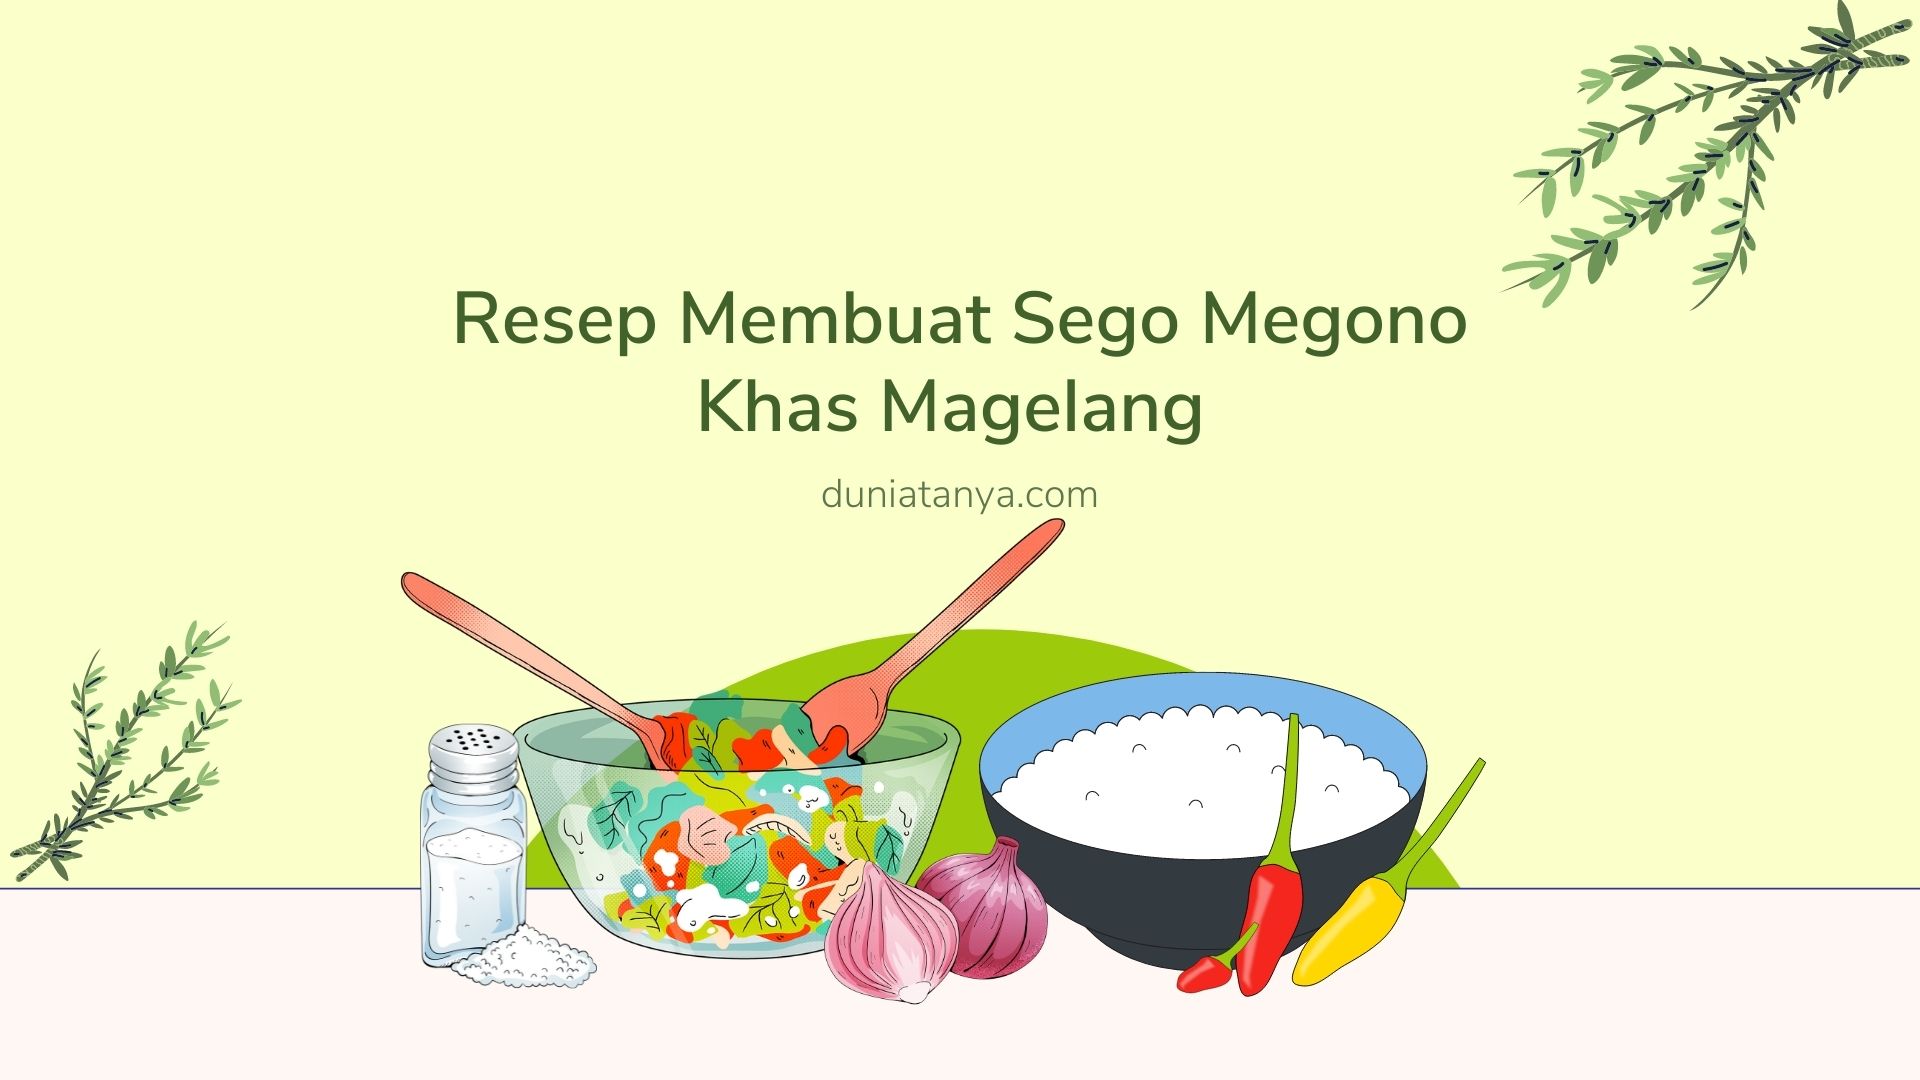 You are currently viewing Resep Membuat Sego Megono Khas Magelang